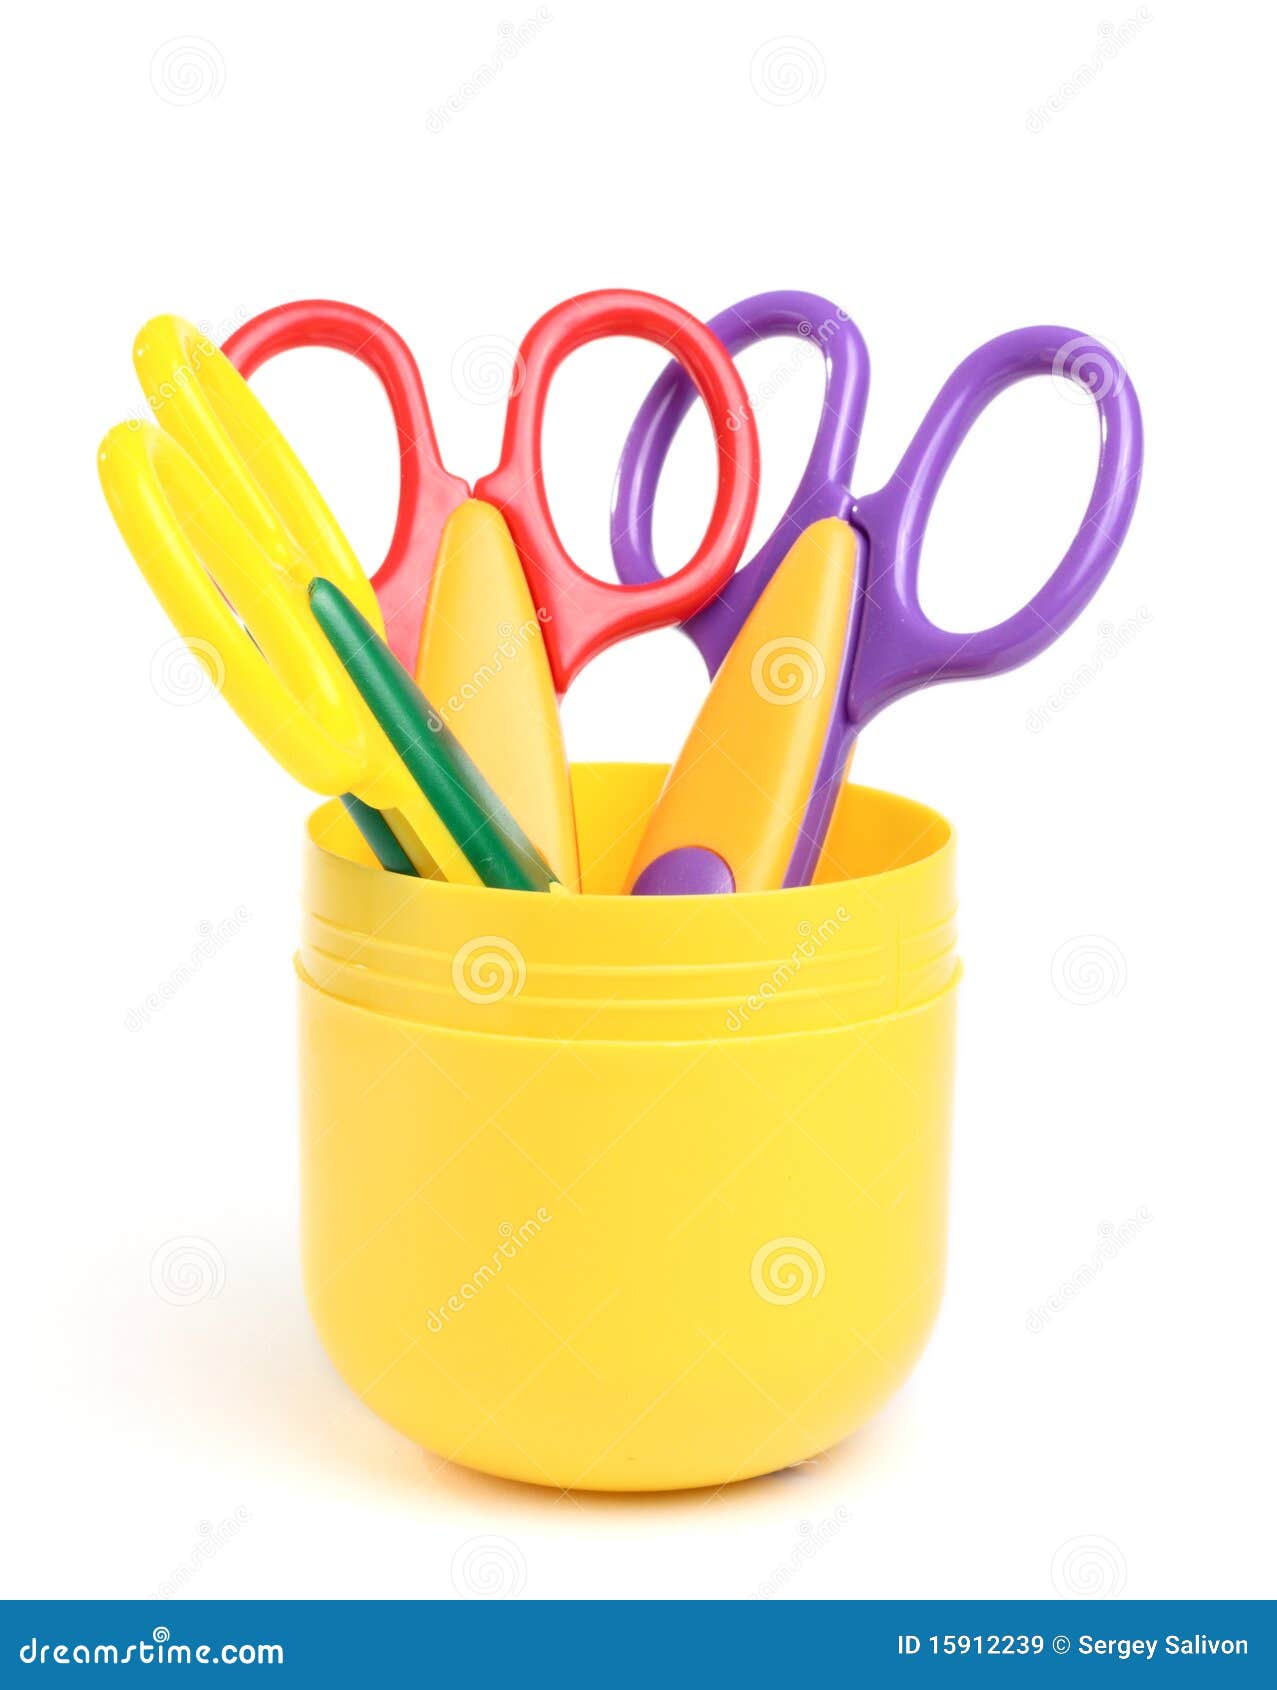 https://thumbs.dreamstime.com/z/some-scissors-container-15912239.jpg